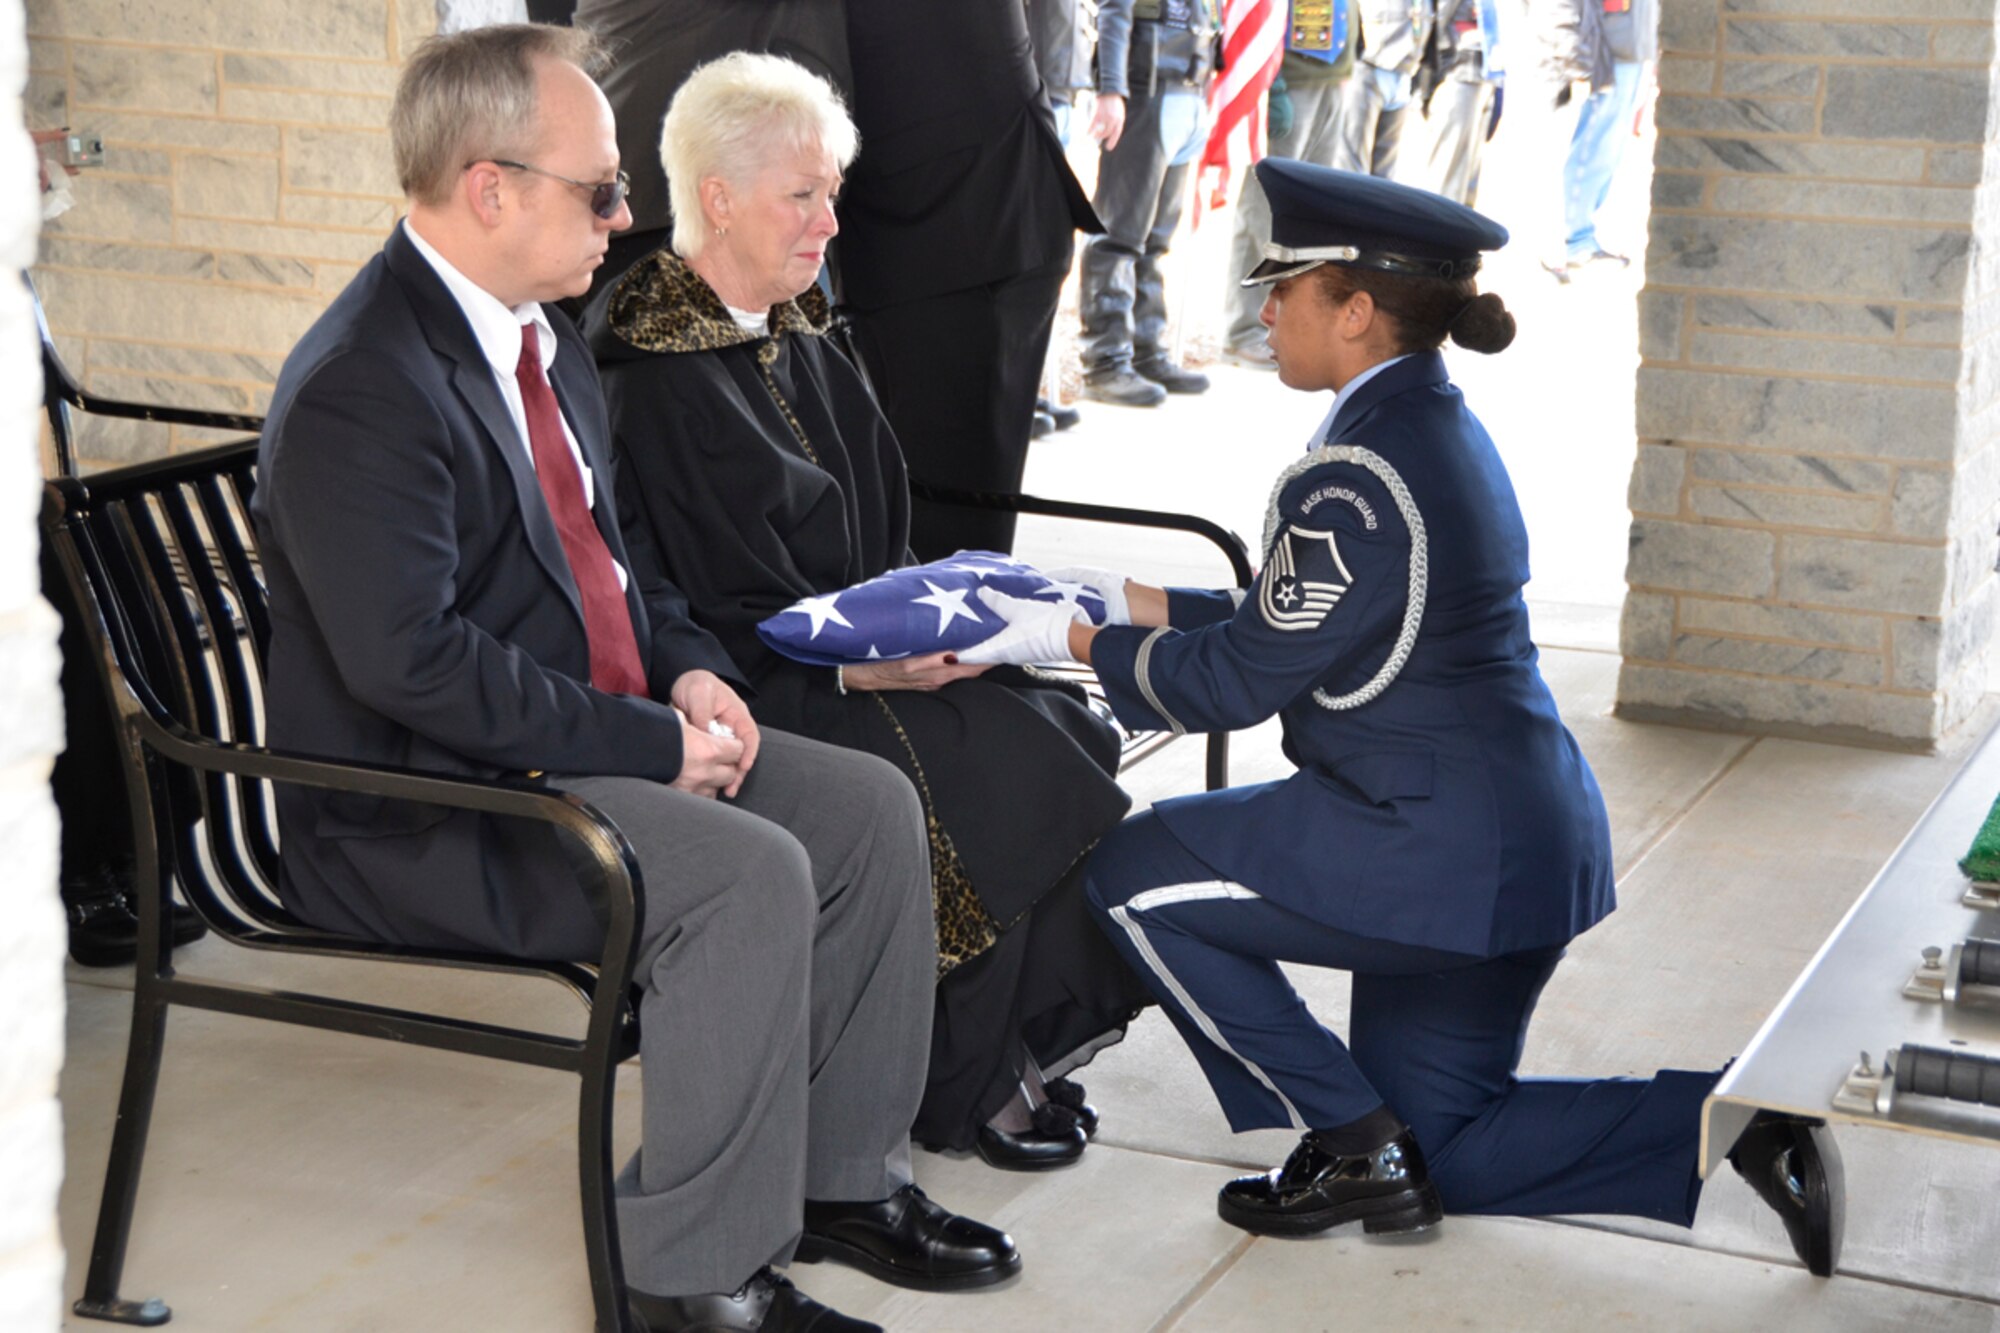 “On behalf of the President of the United States, the Department of the Air Force, and a grateful nation, our country's flag is presented to you as a token of appreciation for years of honorable and faithful service by your loved one,” said Master Sgt. Lena Tamplin, 94 AW Honor Guard, as she presented the U.S. Flag to Gerald A. Marshall’s wife, Saundra, Feb. 13. Marshall, retired U.S. Air Force Master Sgt. and civil servant, was honored at memorial services at the Chapel of West Cobb Funeral home and an inurnment at the Georgia National Cemetery in Canton, Ga.